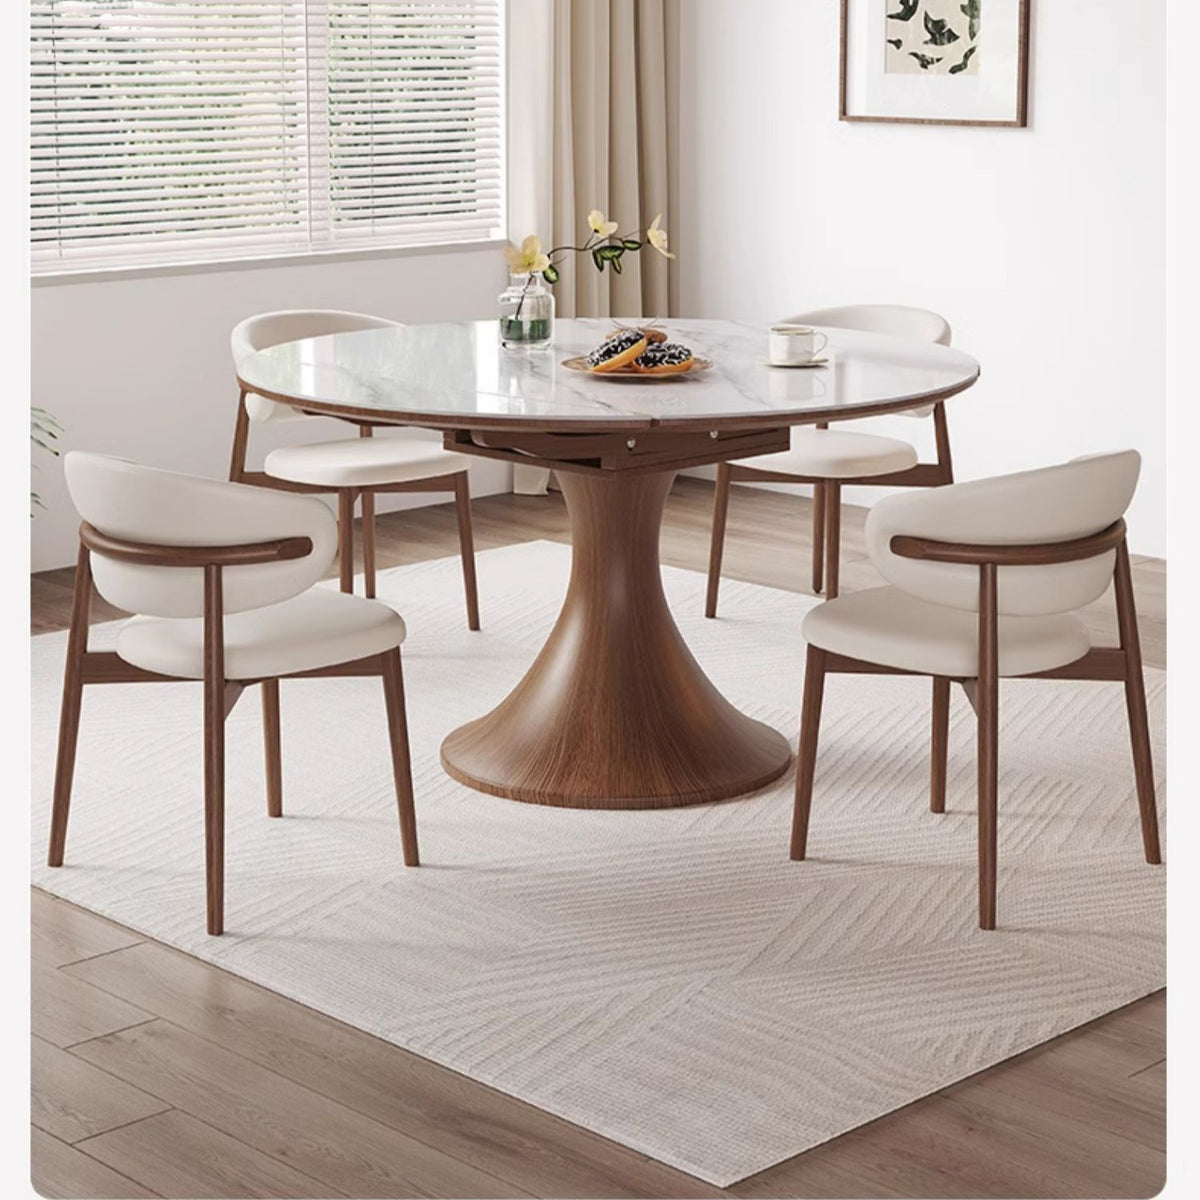 Elegant Glossy White Sintered Stone Table with Oak Wood Base for Modern Interiors fmbs-003